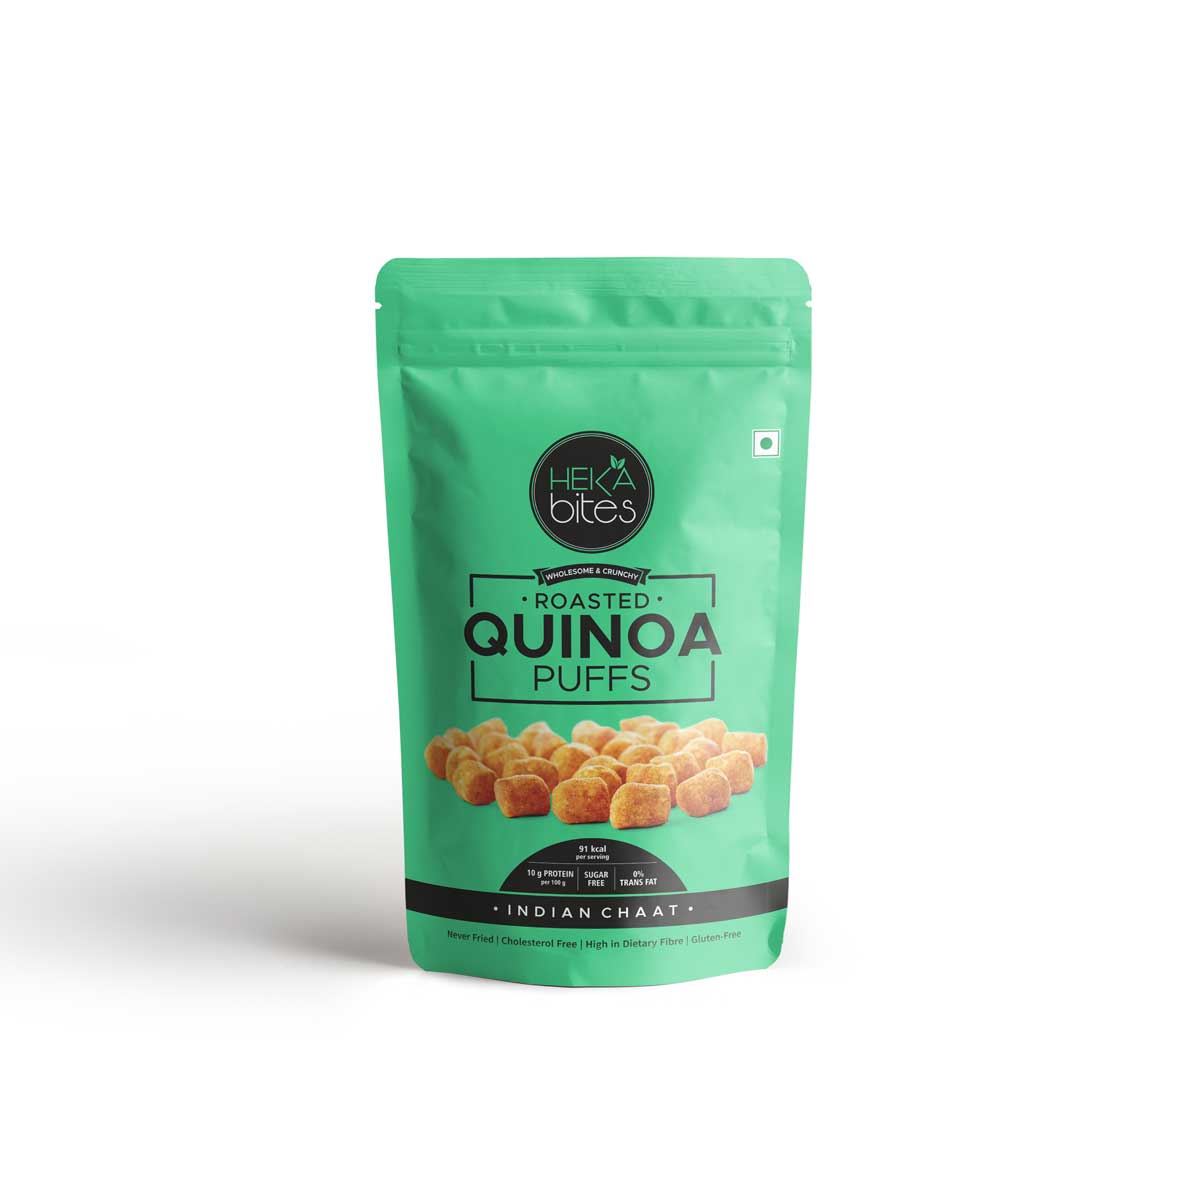 Quinoa Puffs - Indian Chaat (1 Pack of 35 grams)